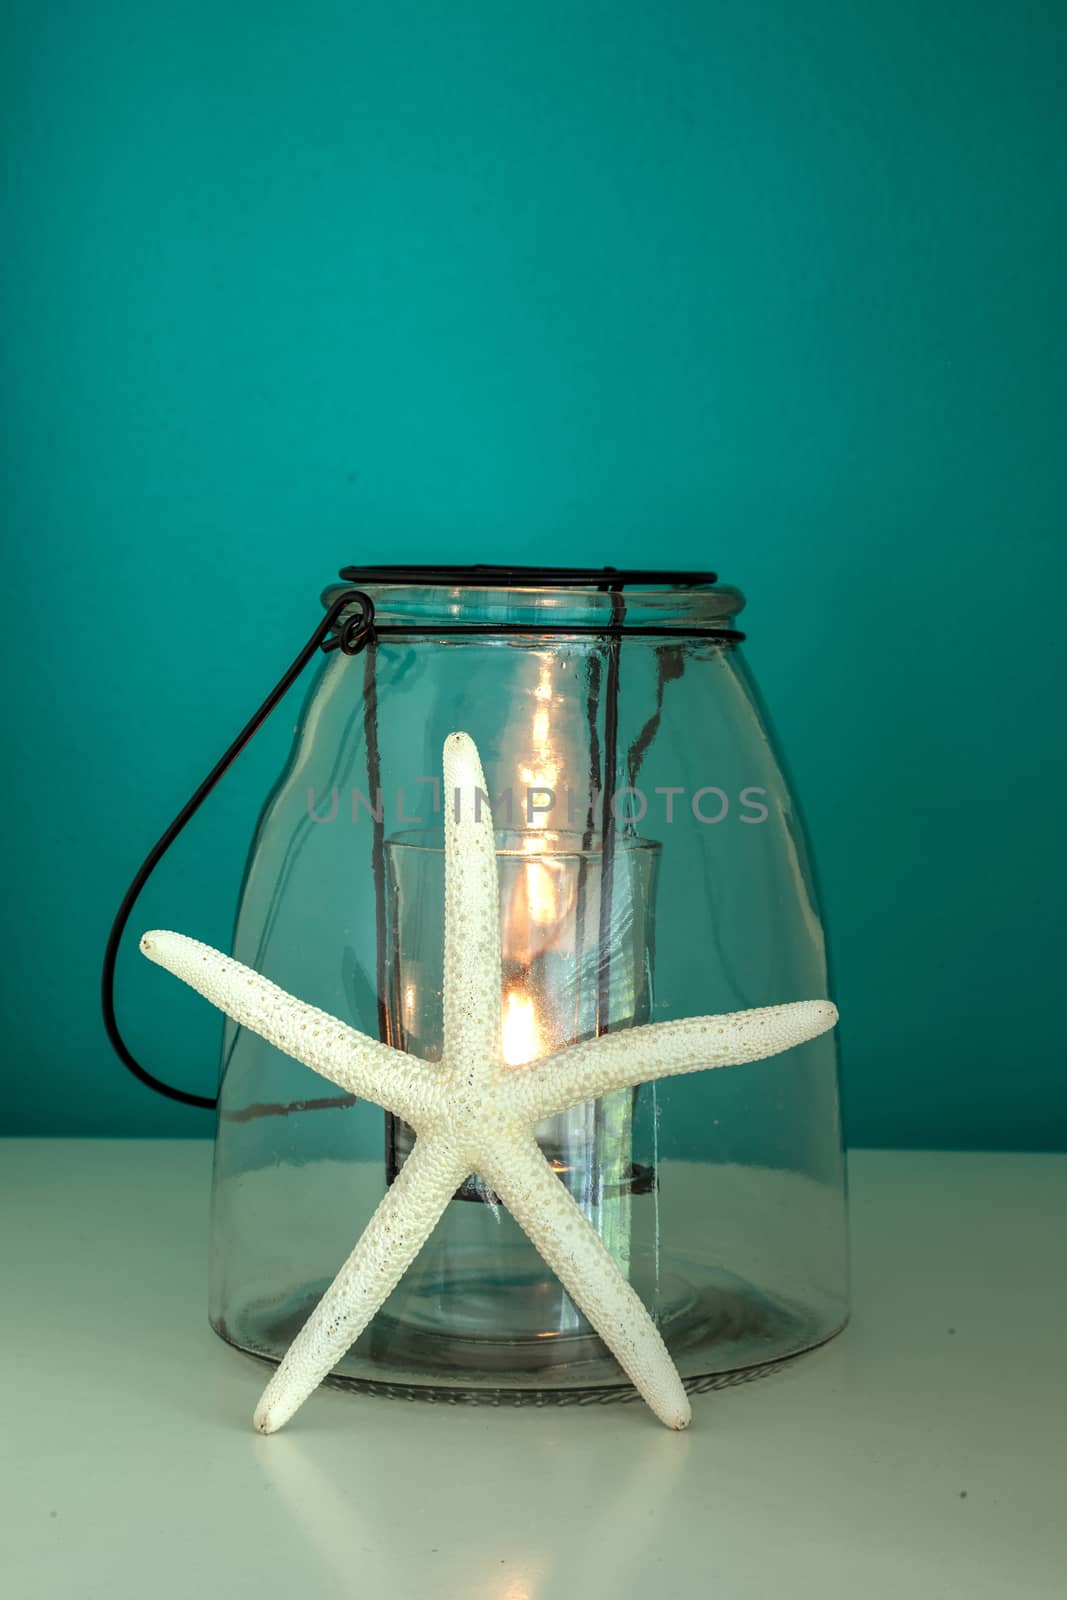 Starfish against a candle with an aqua blue green background by steffstarr